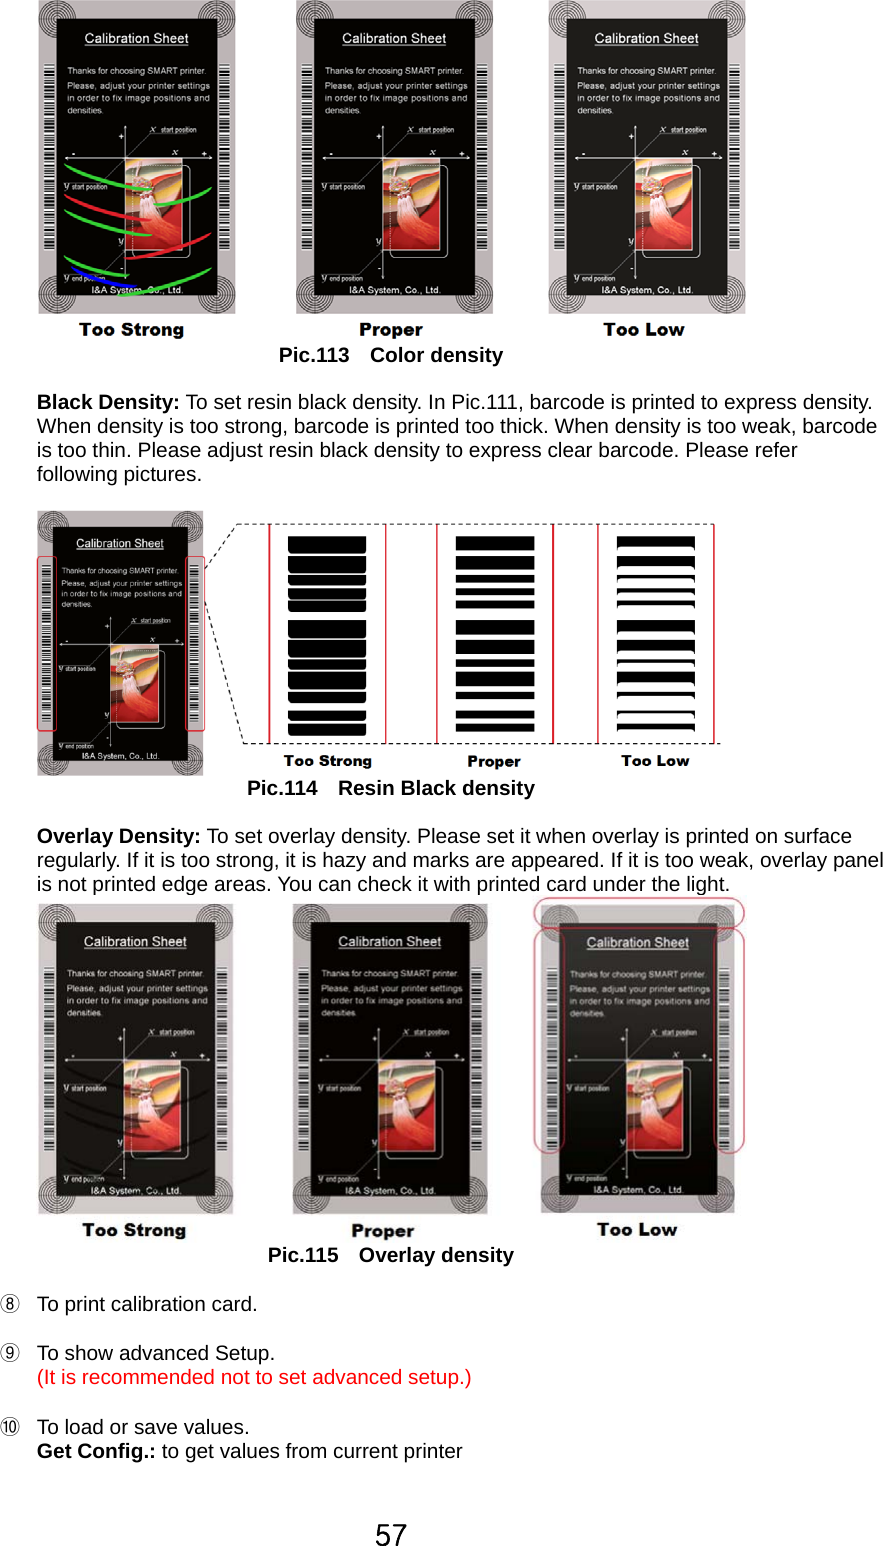 57  Pic.113  Color density  Black Density: To set resin black density. In Pic.111, barcode is printed to express density.   When density is too strong, barcode is printed too thick. When density is too weak, barcode is too thin. Please adjust resin black density to express clear barcode. Please refer following pictures.     Pic.114  Resin Black density  Overlay Density: To set overlay density. Please set it when overlay is printed on surface regularly. If it is too strong, it is hazy and marks are appeared. If it is too weak, overlay panel is not printed edge areas. You can check it with printed card under the light.    Pic.115  Overlay density  ⑧  To print calibration card.    ⑨  To show advanced Setup.   (It is recommended not to set advanced setup.)  ⑩  To load or save values.   Get Config.: to get values from current printer  